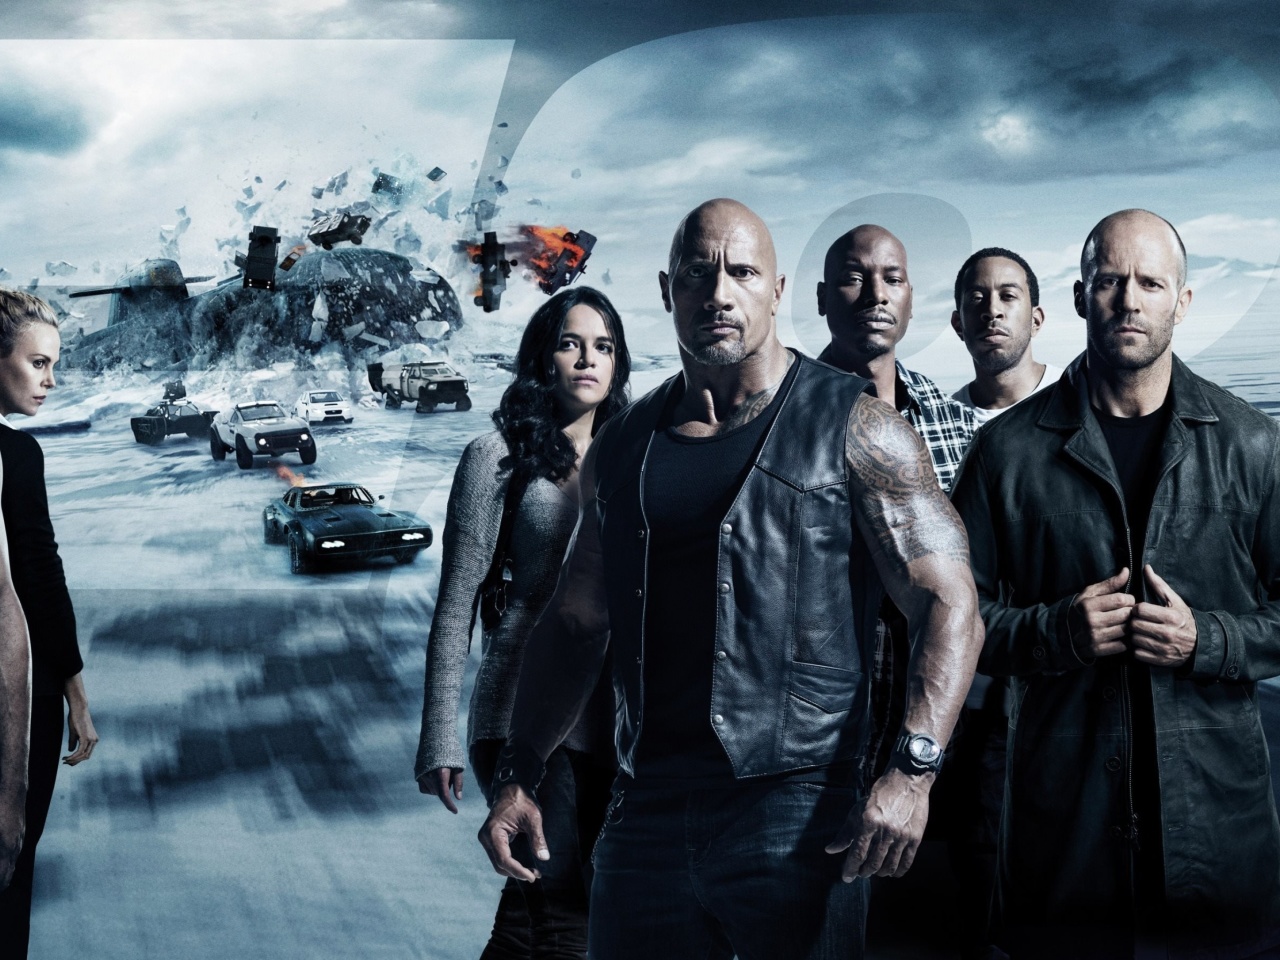 Обои The Fate of the Furious with Vin Diesel, Dwayne Johnson, Charlize Theron 1280x960